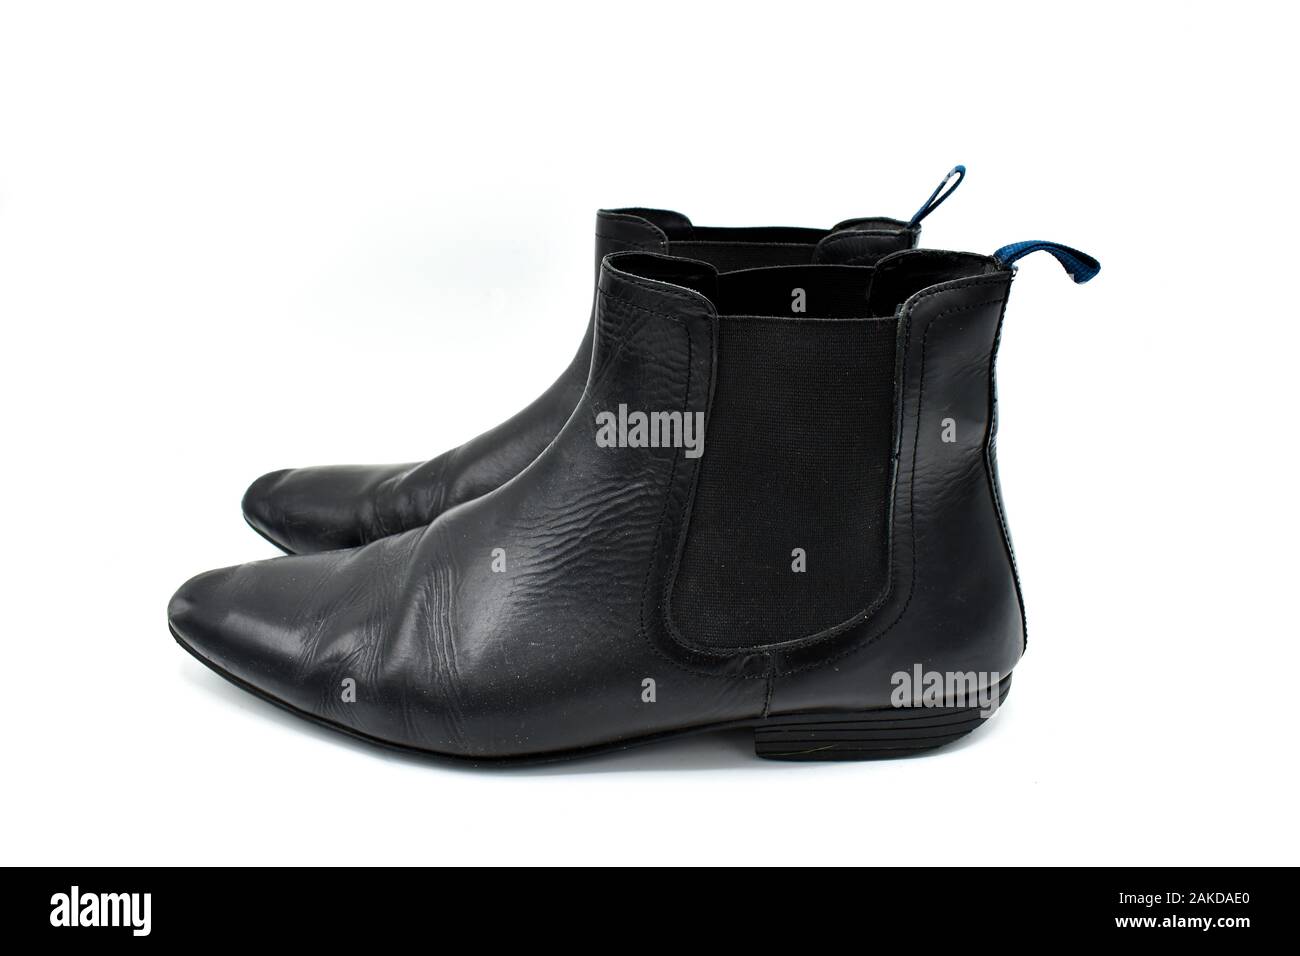 Chelsea Boots High Resolution Stock Photography and Images - Alamy